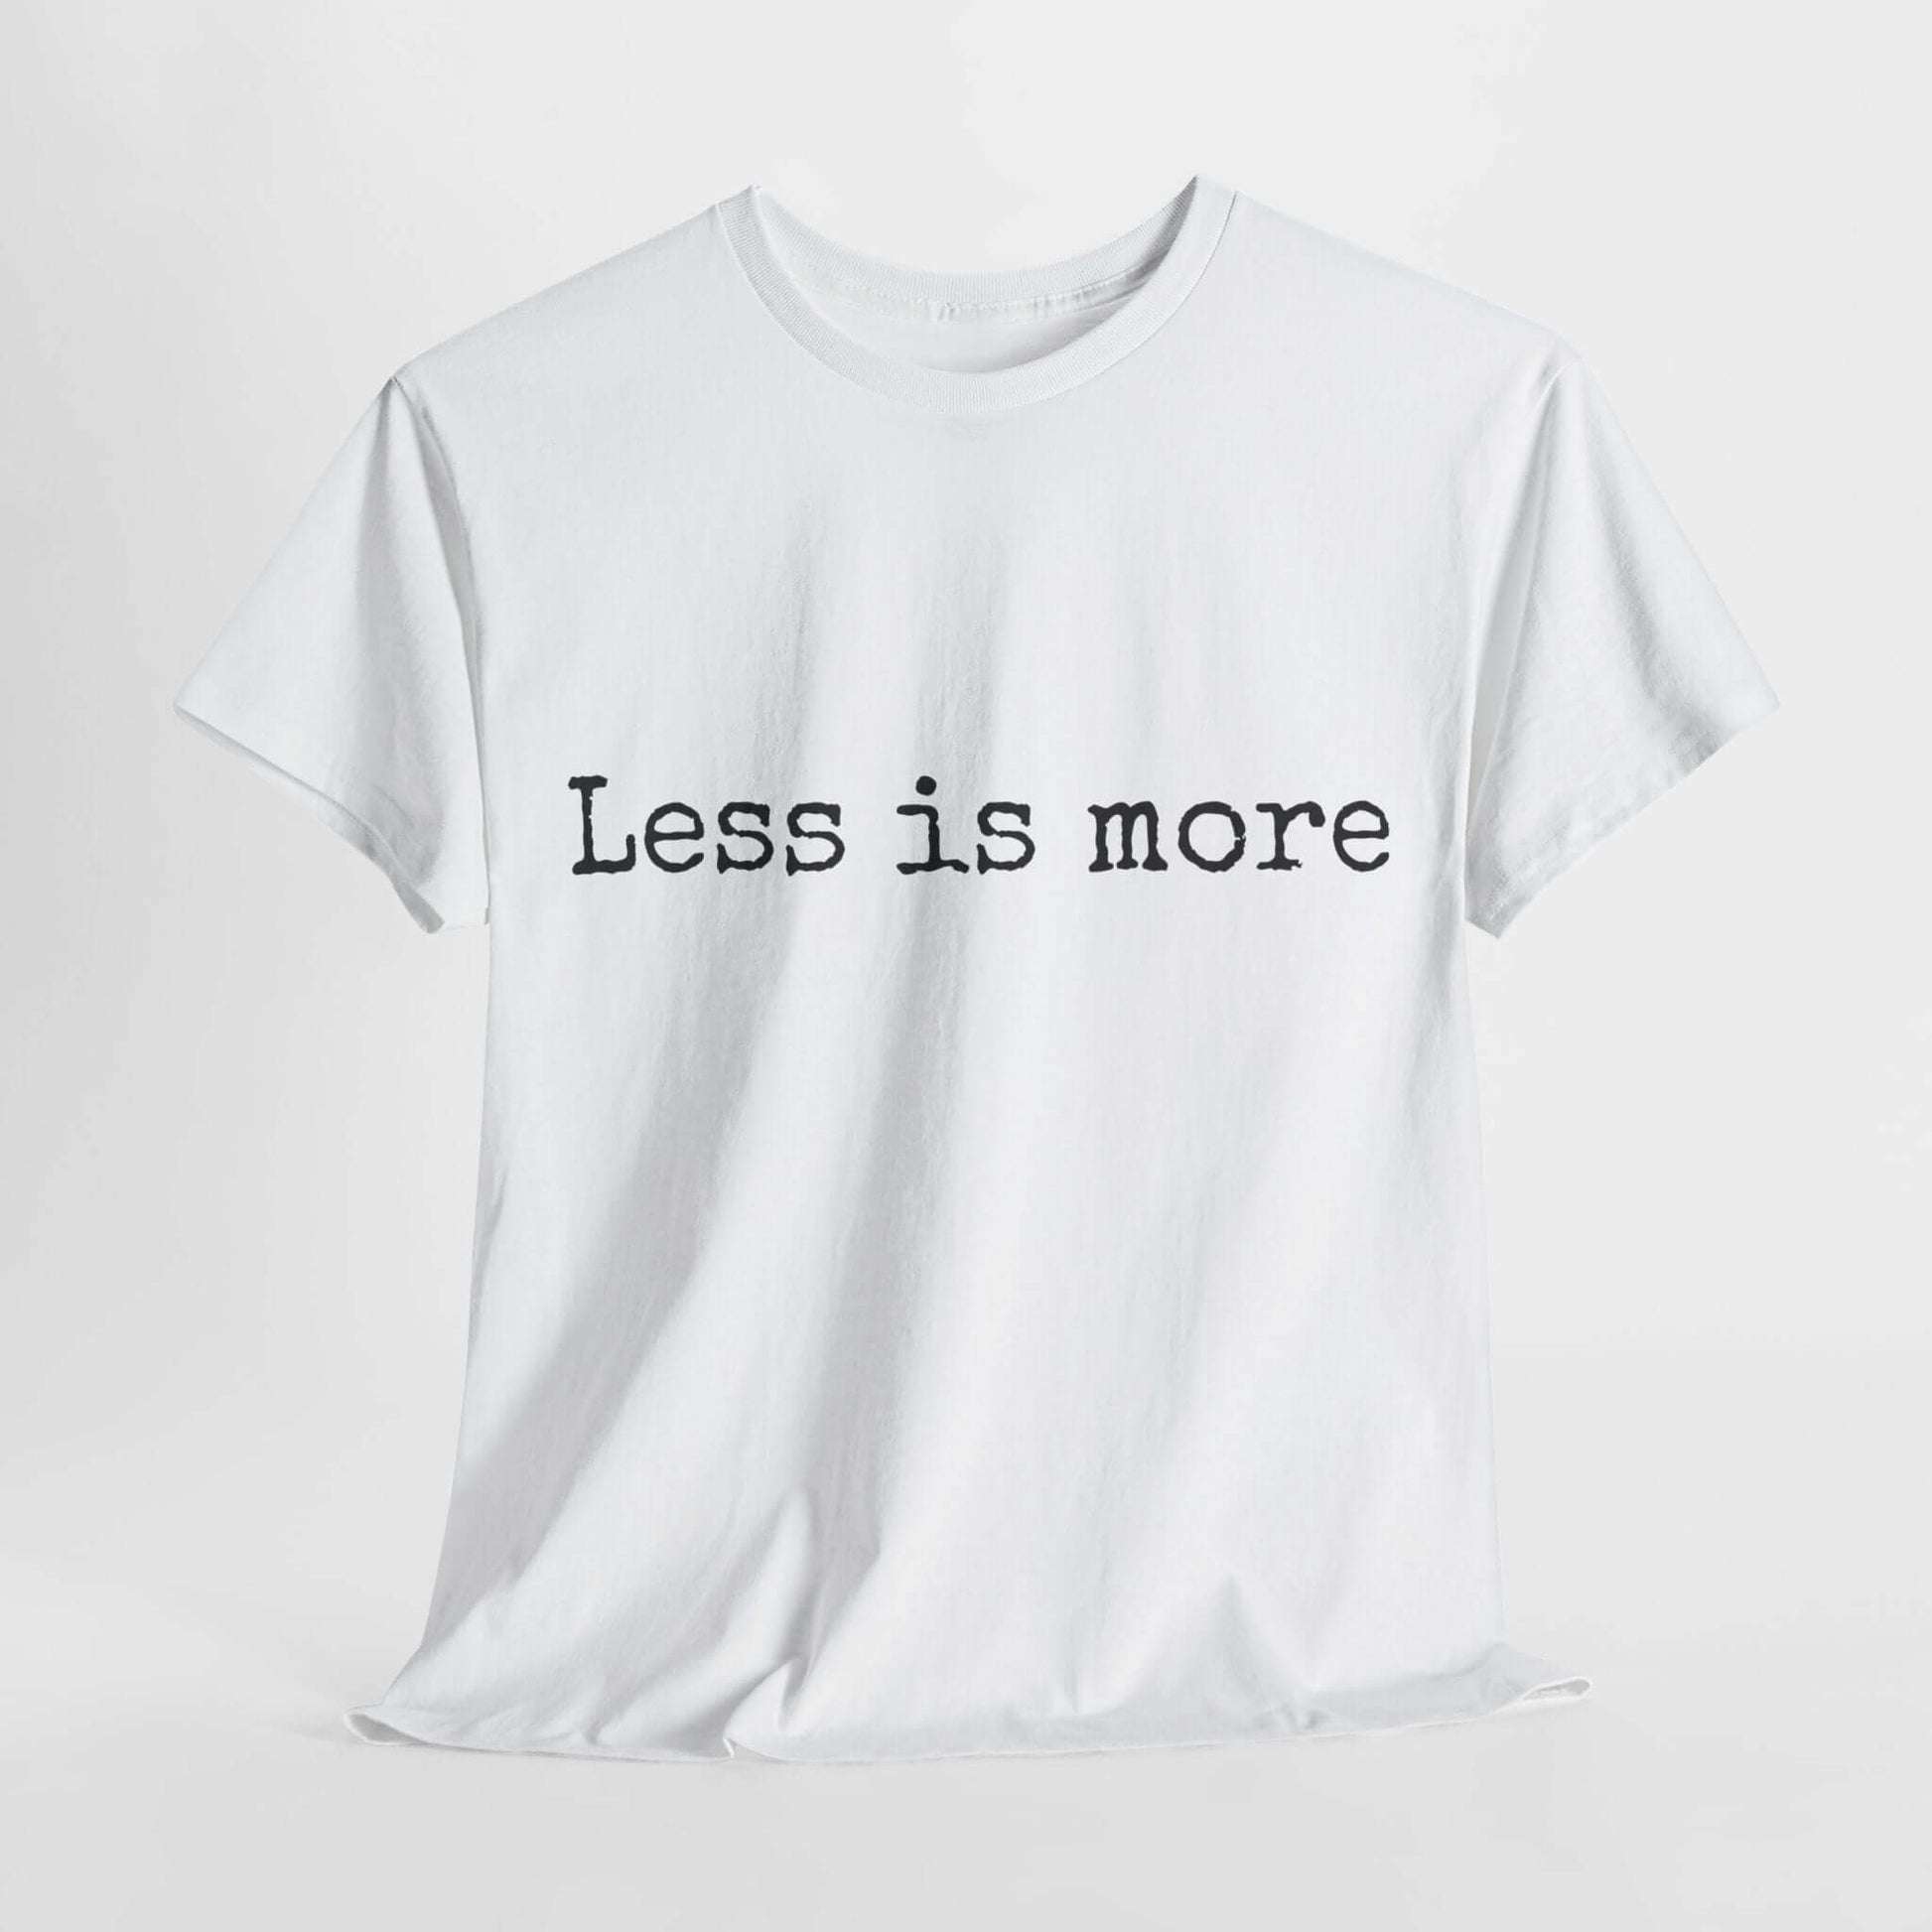 Inspirational T shirt | Less is more